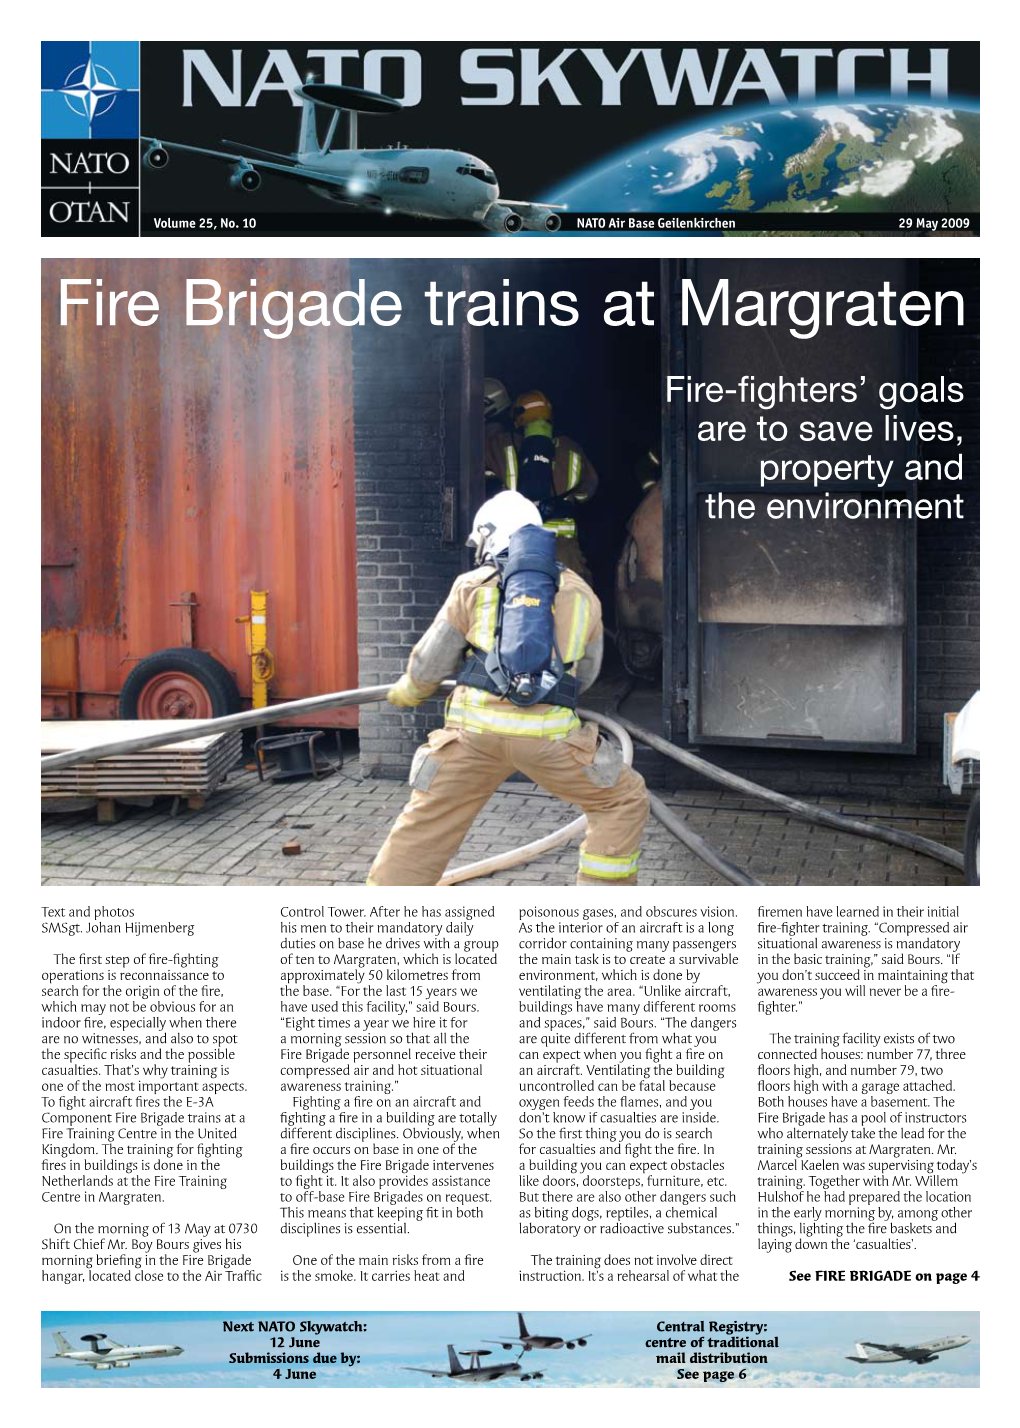 Fire Brigade Trains at Margraten Fire-Fighters’ Goals Are to Save Lives, Property and the Environment